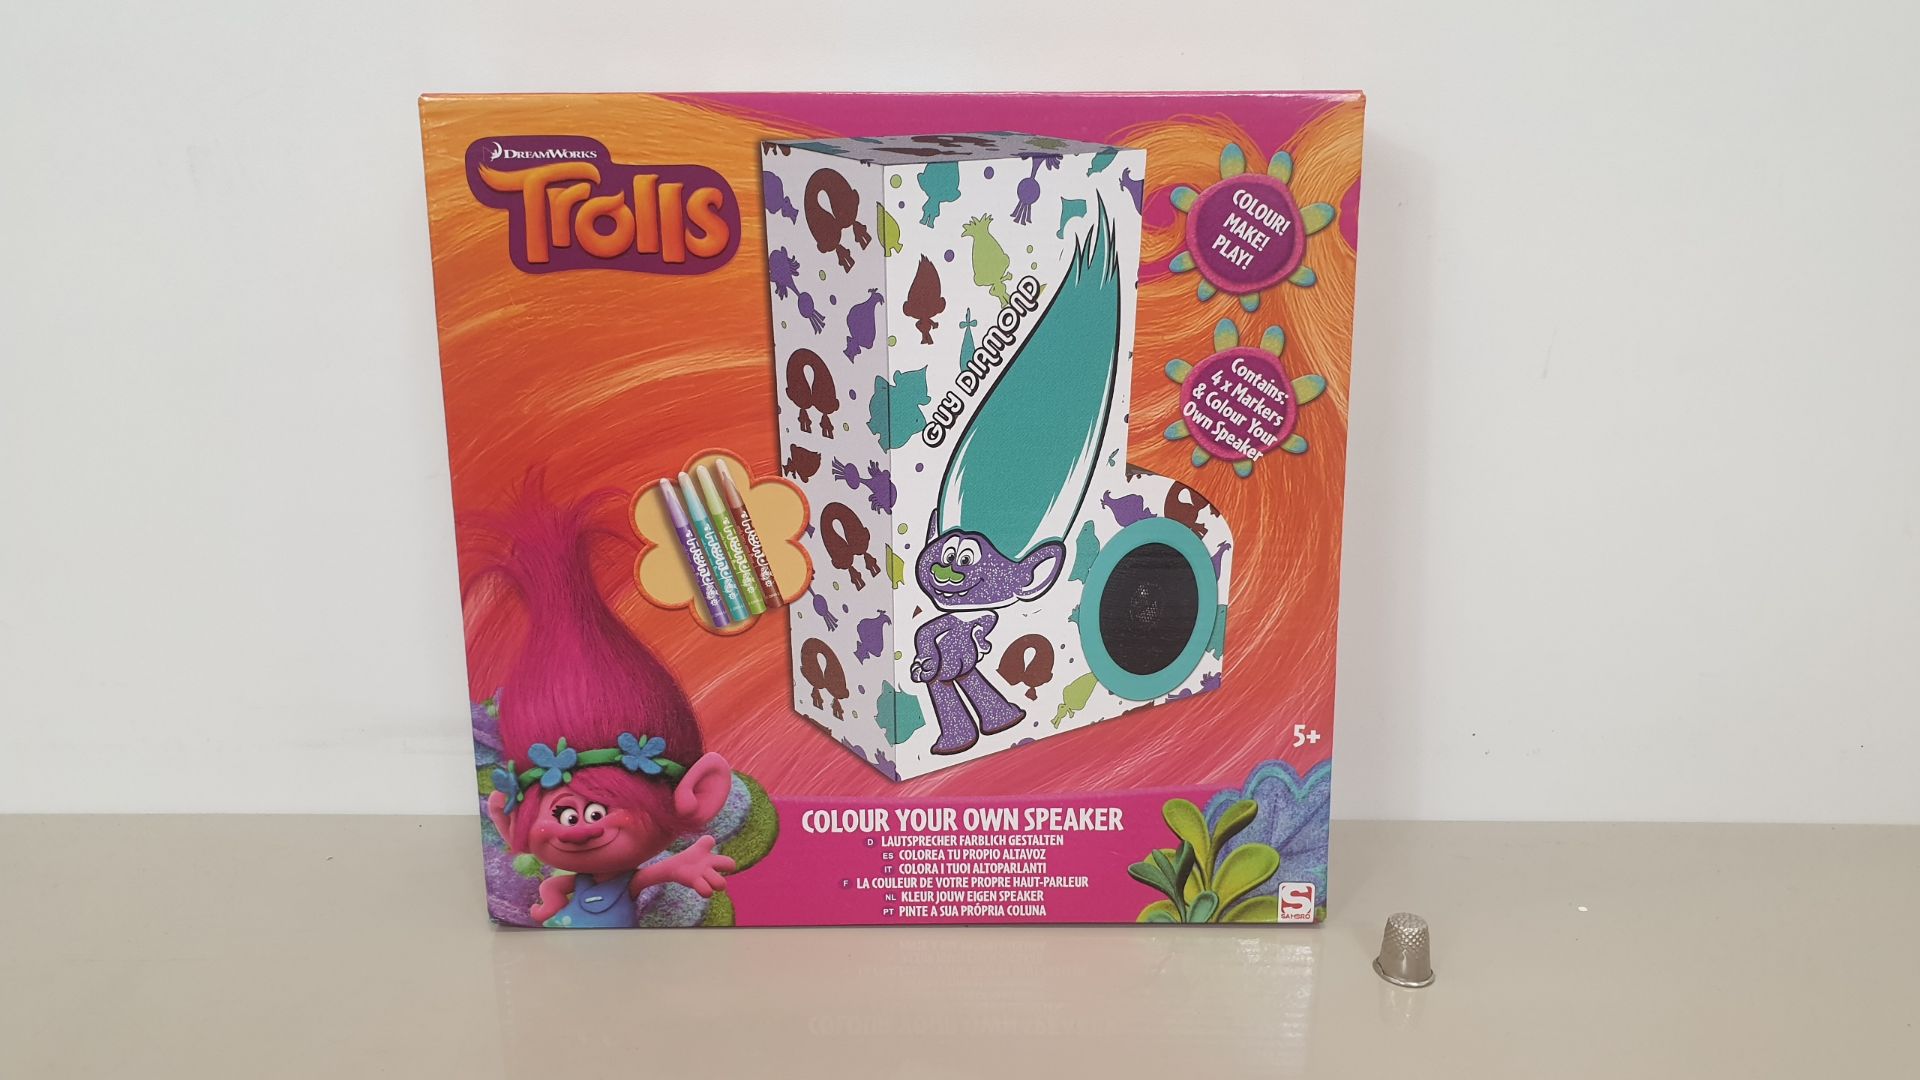 48 X BRAND NEW DREAMWORKS TROLLS COLOUR YOUR OWN SPEAKER CONTAINING 4 MARKERS & COLOUR YOUR OWN